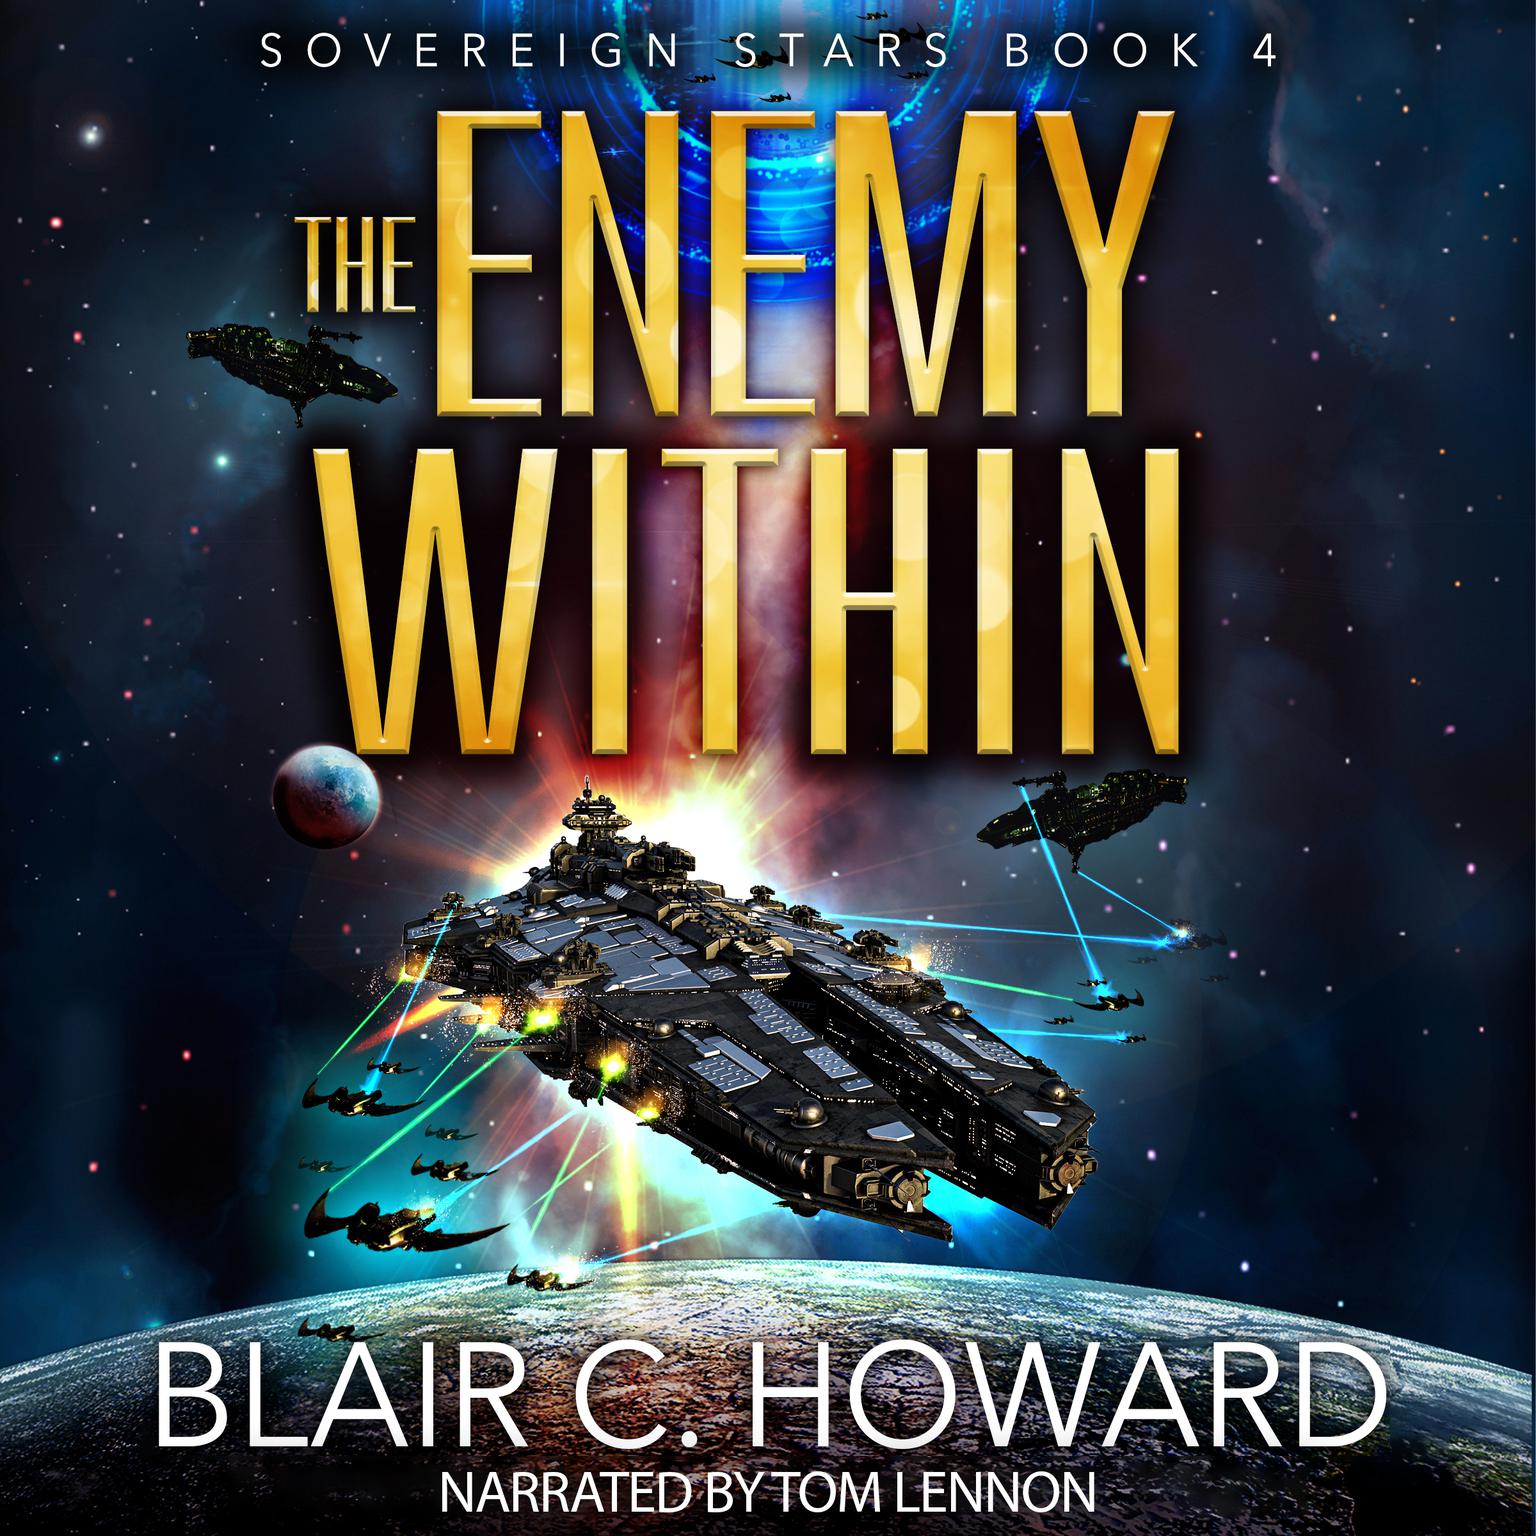 The Enemy Within Audiobook, by Blair Howard